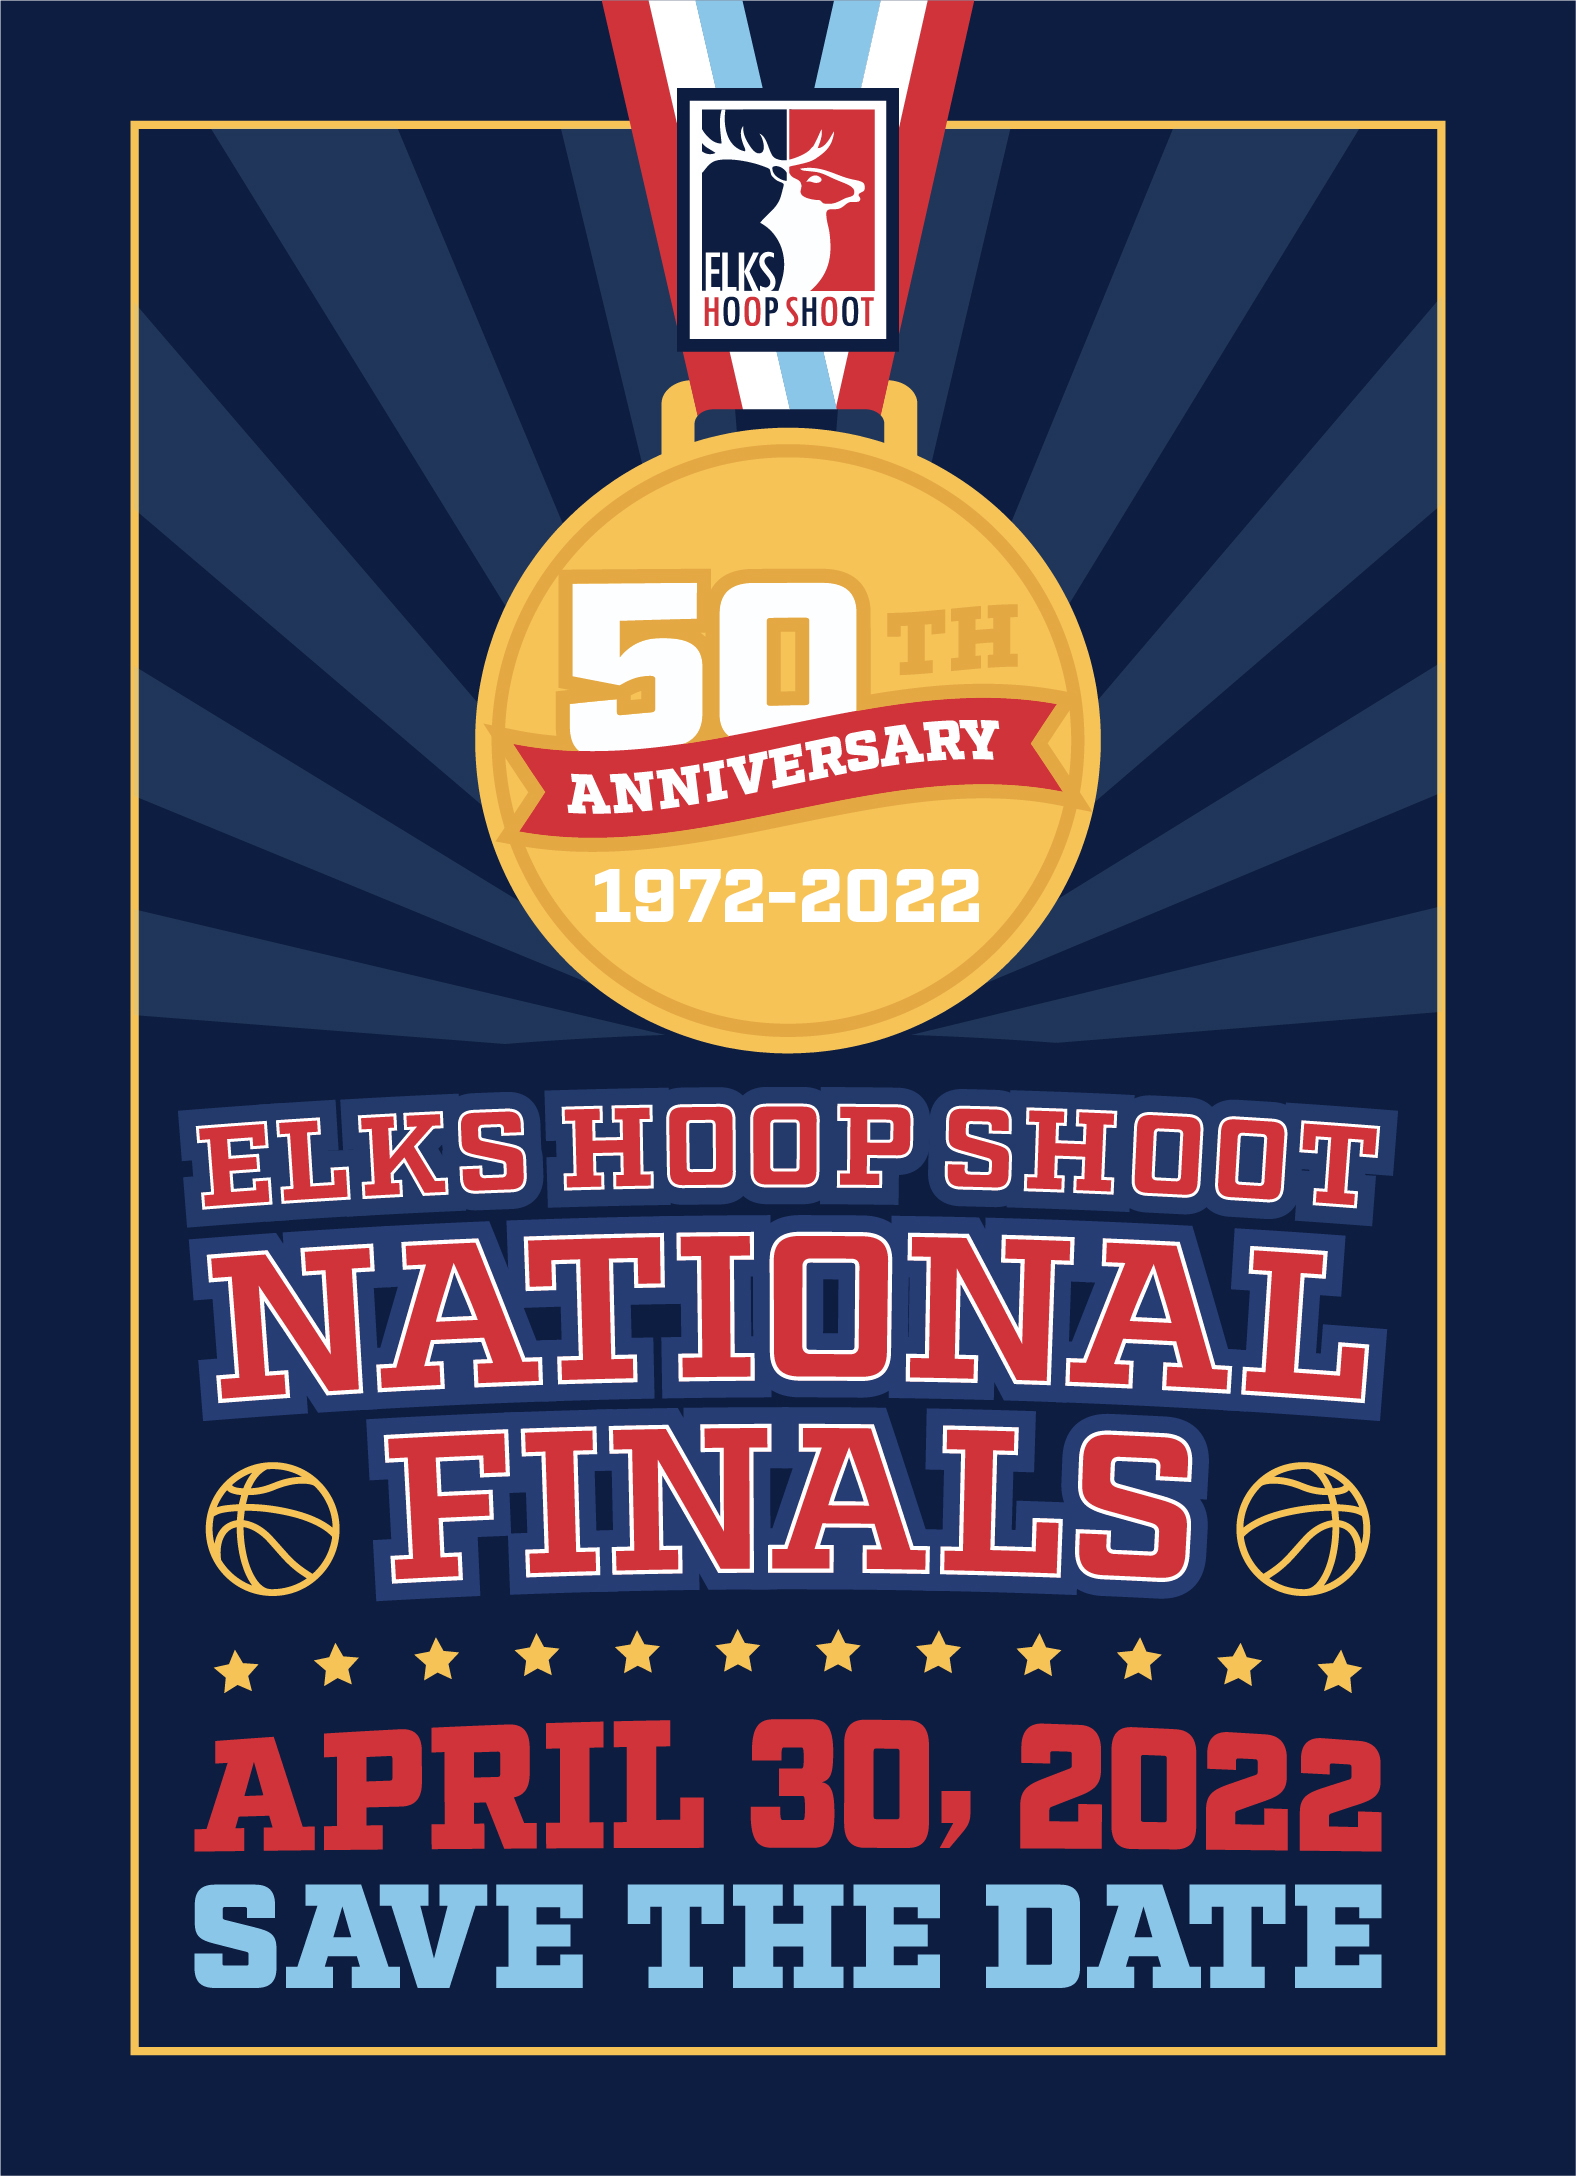 Elks Hoop Shoot Save the Date Image. When: Saturday, April 30, 2022 at Wintrust Arena in Chicago